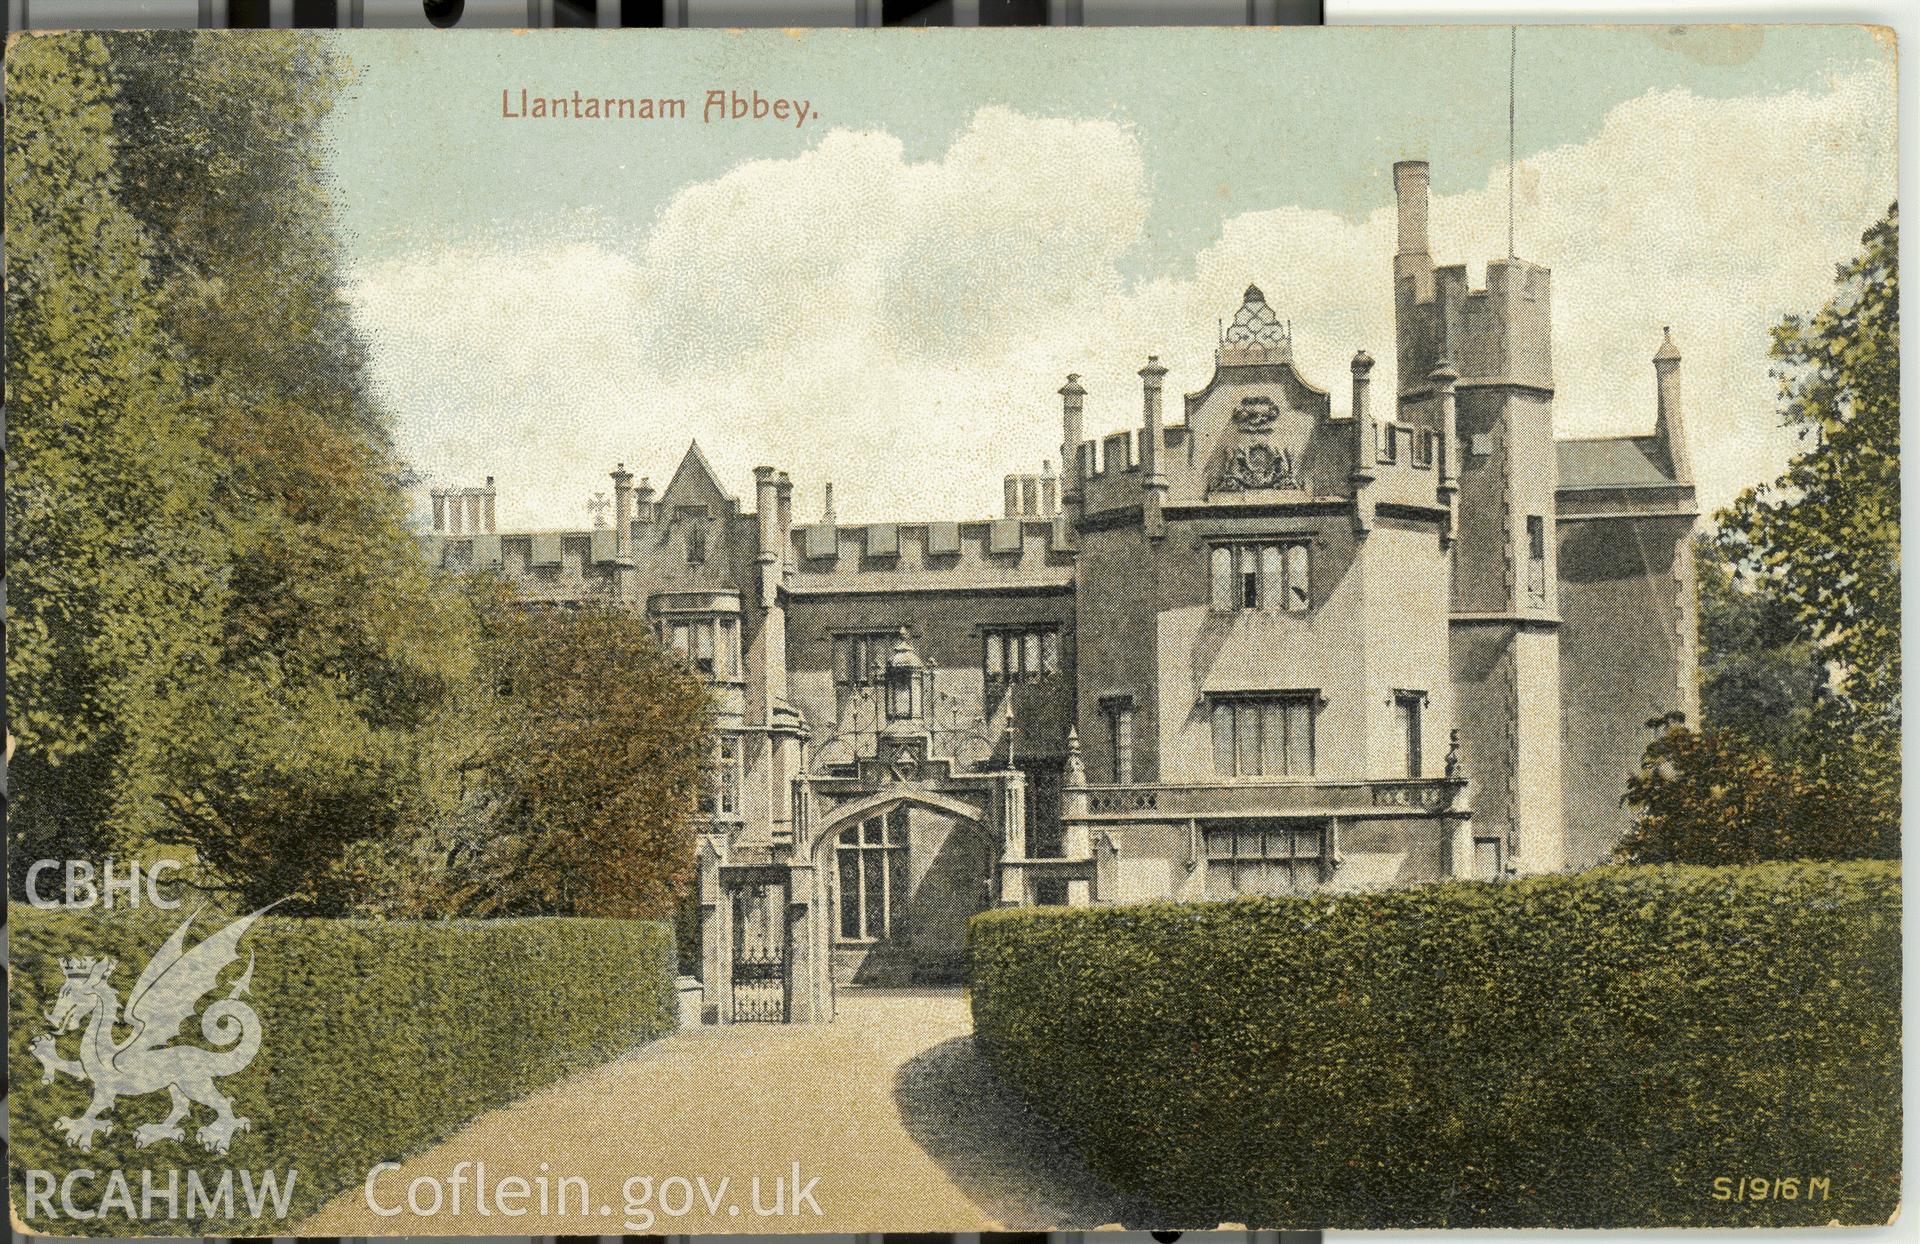 Digitised postcard image of Llantarnam Abbey, Harding's (Bristol and Cardiff). Produced by Parks and Gardens Data Services, from an original item in the Peter Davis Collection at Parks and Gardens UK. We hold only web-resolution images of this collection, suitable for viewing on screen and for research purposes only. We do not hold the original images, or publication quality scans.